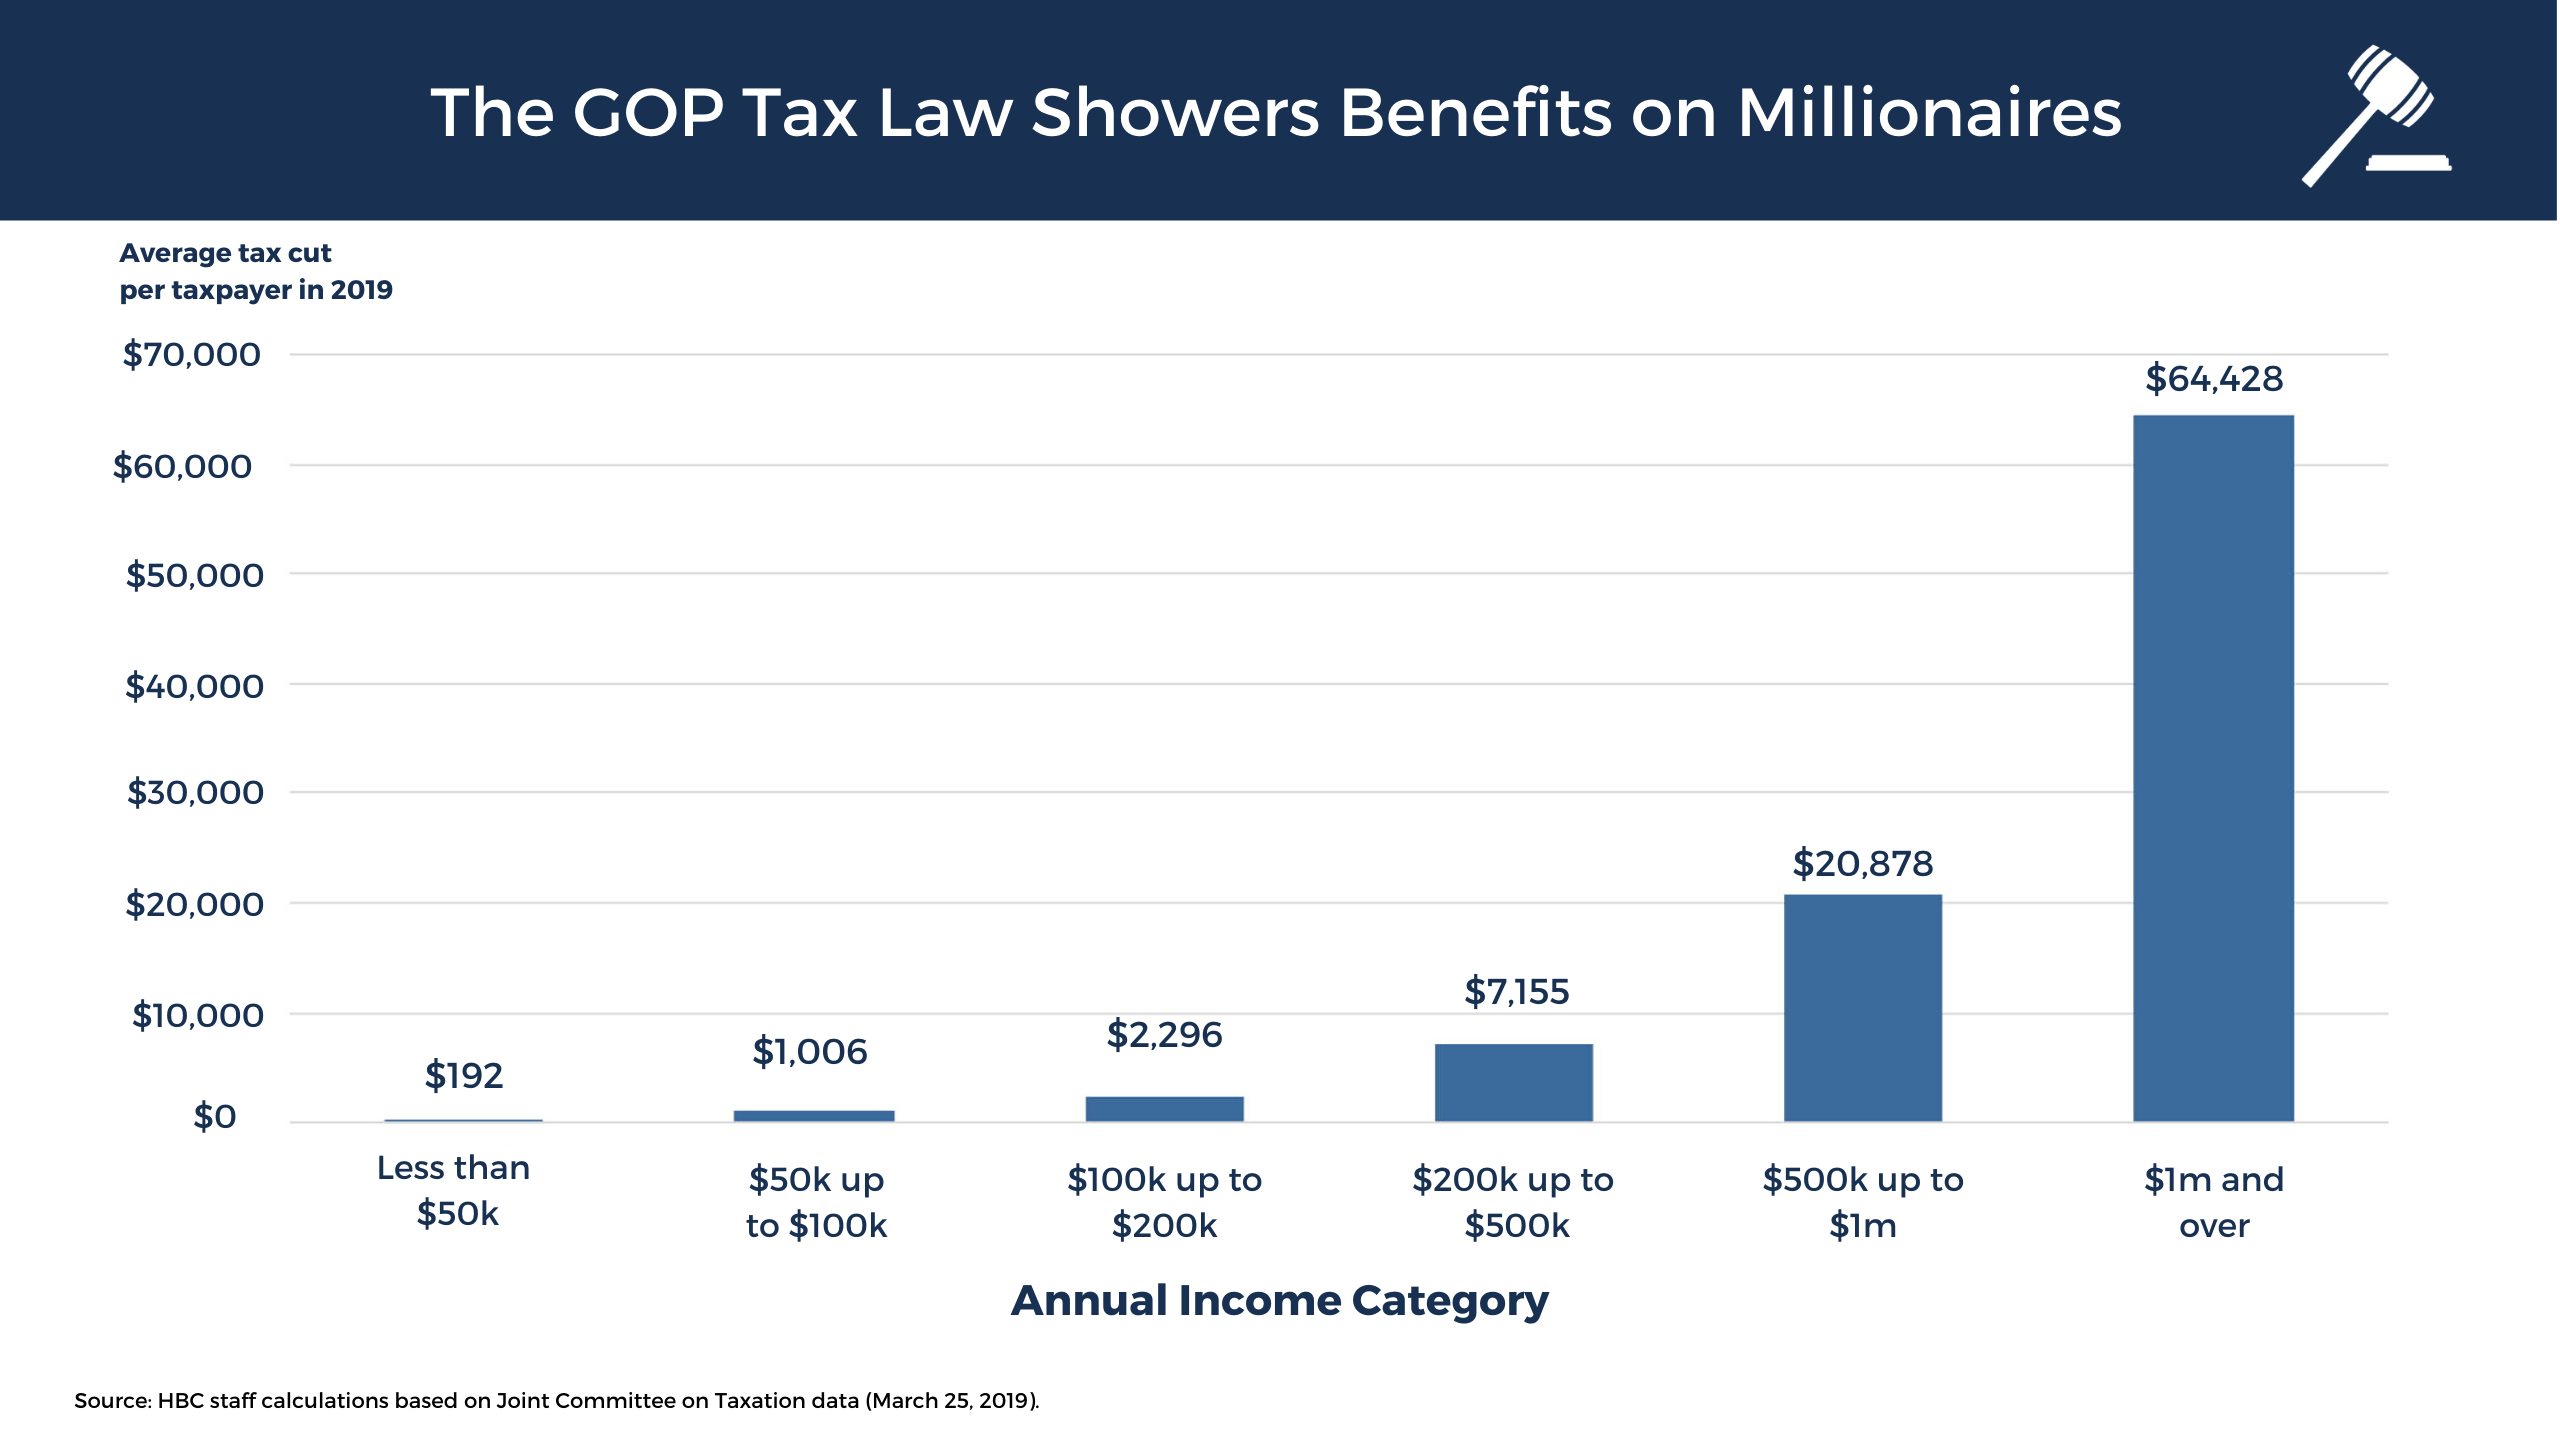 The Republican Tax Law showered unnecessary benefits on millionaires